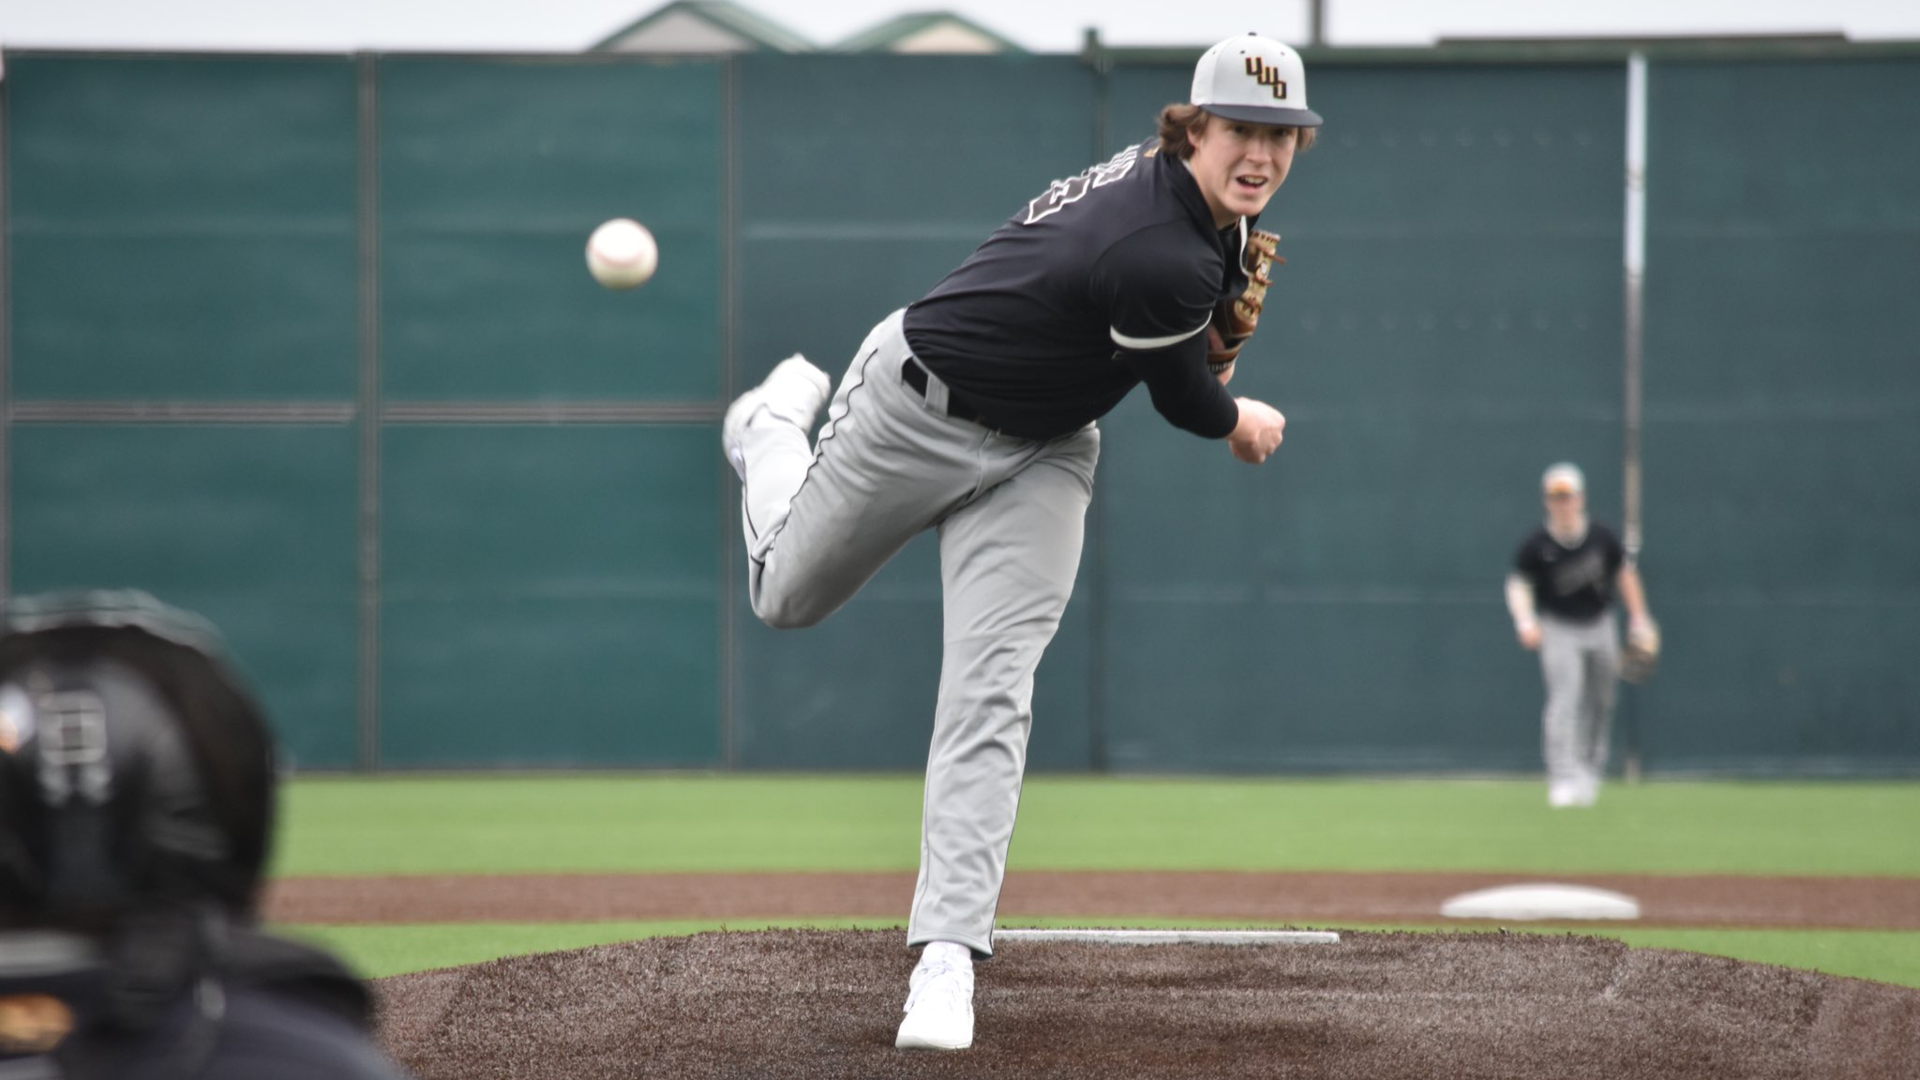 LJ Waco pitched all seven innings of the Titans' win, fanning four batters. Photo Credit: Jennifer Zuberbier, UW-Oshkosh Athletics